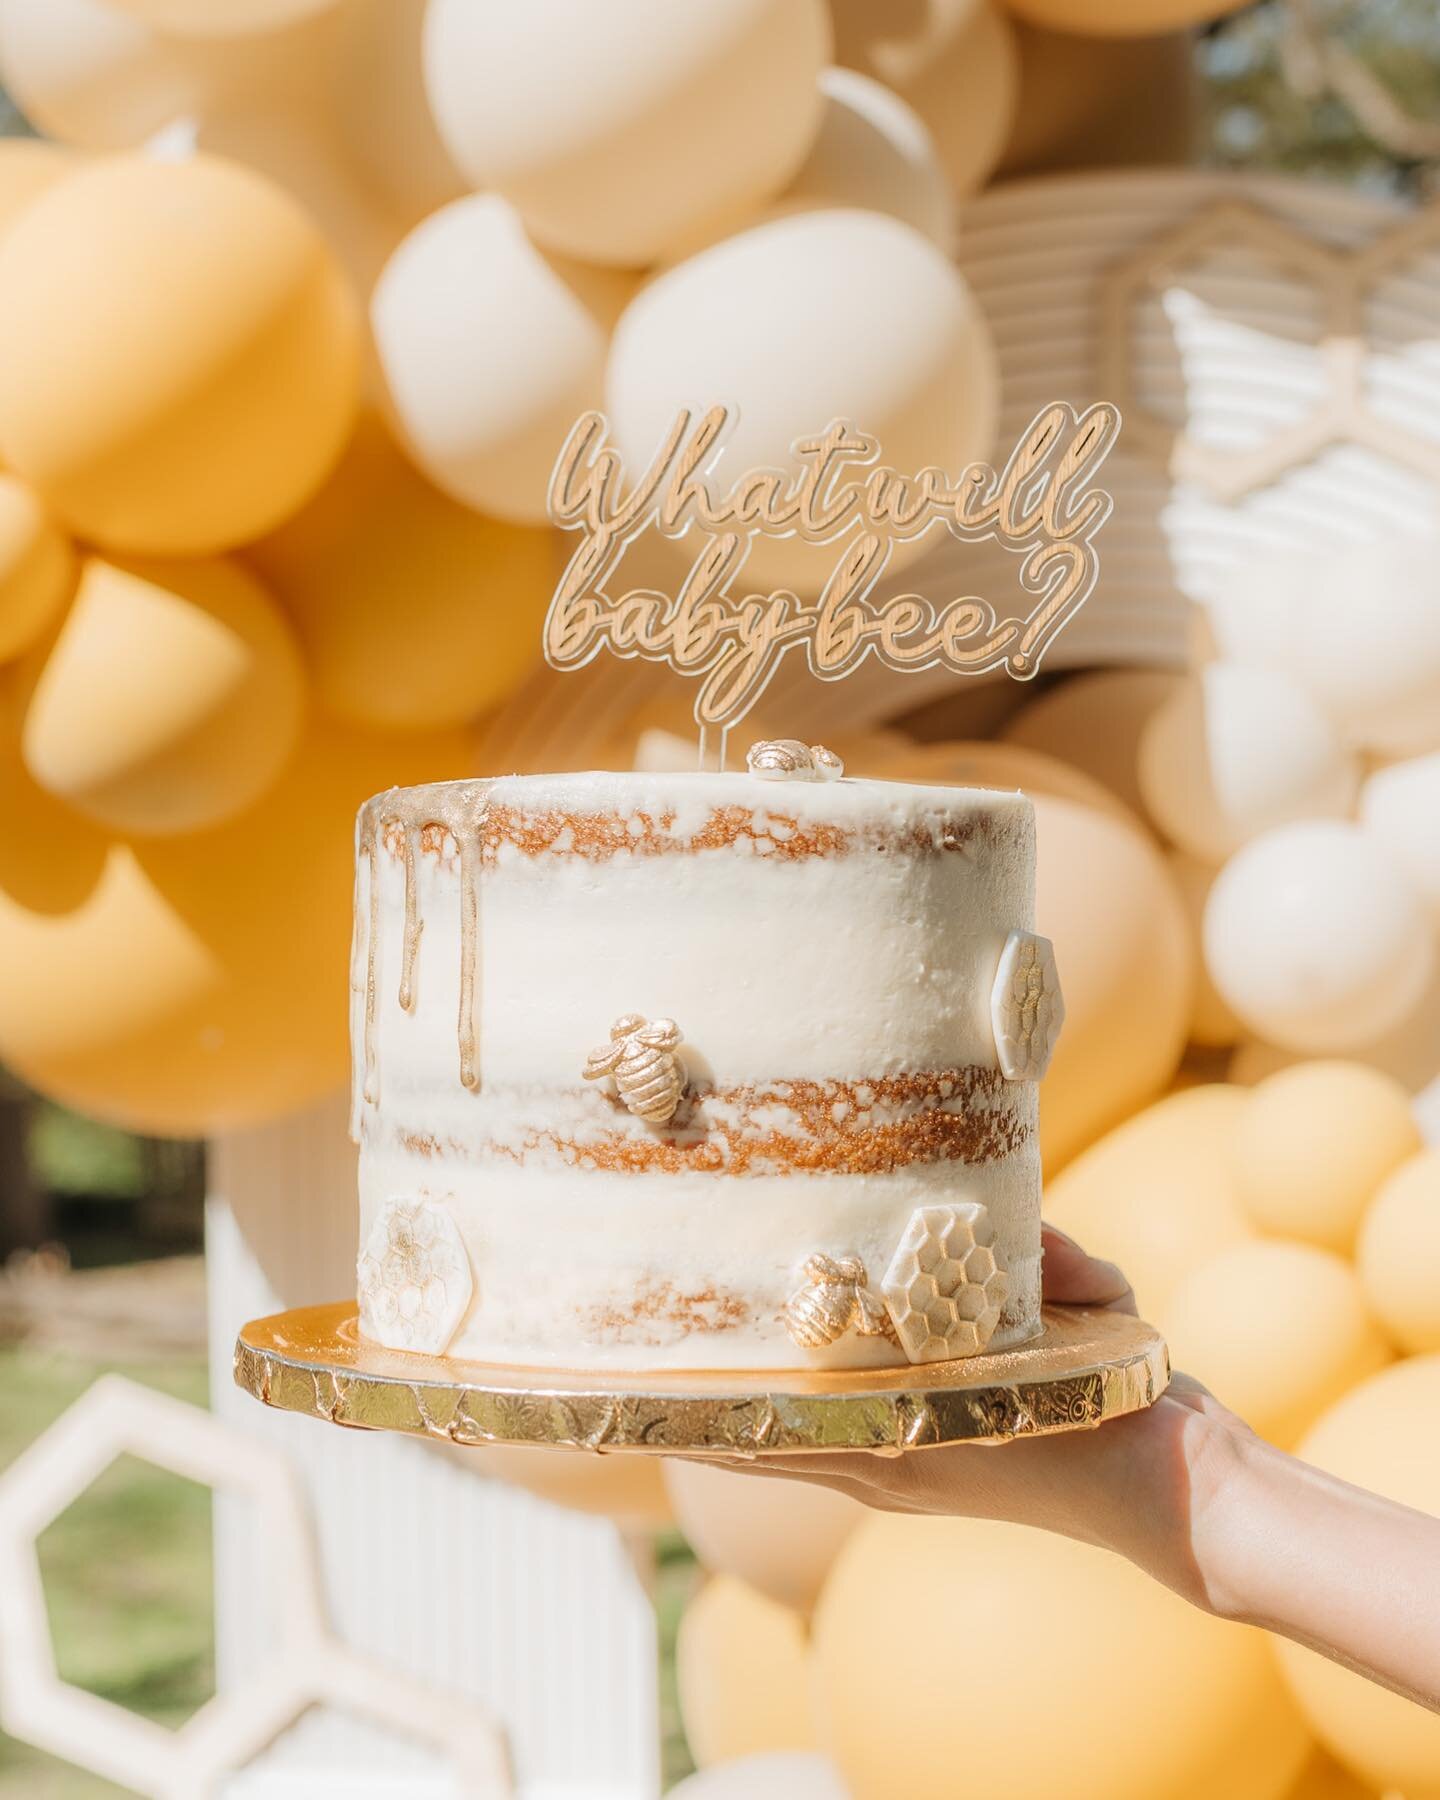 One of hardest things in event planning is deciding on the cake flavor 😜 Honey Vanilla or Caramel Crunch?
.
.
.
.
.
.
.
.
.
What will baby bee? - Gender Reveal
3.25.23 - Lancaster, TX